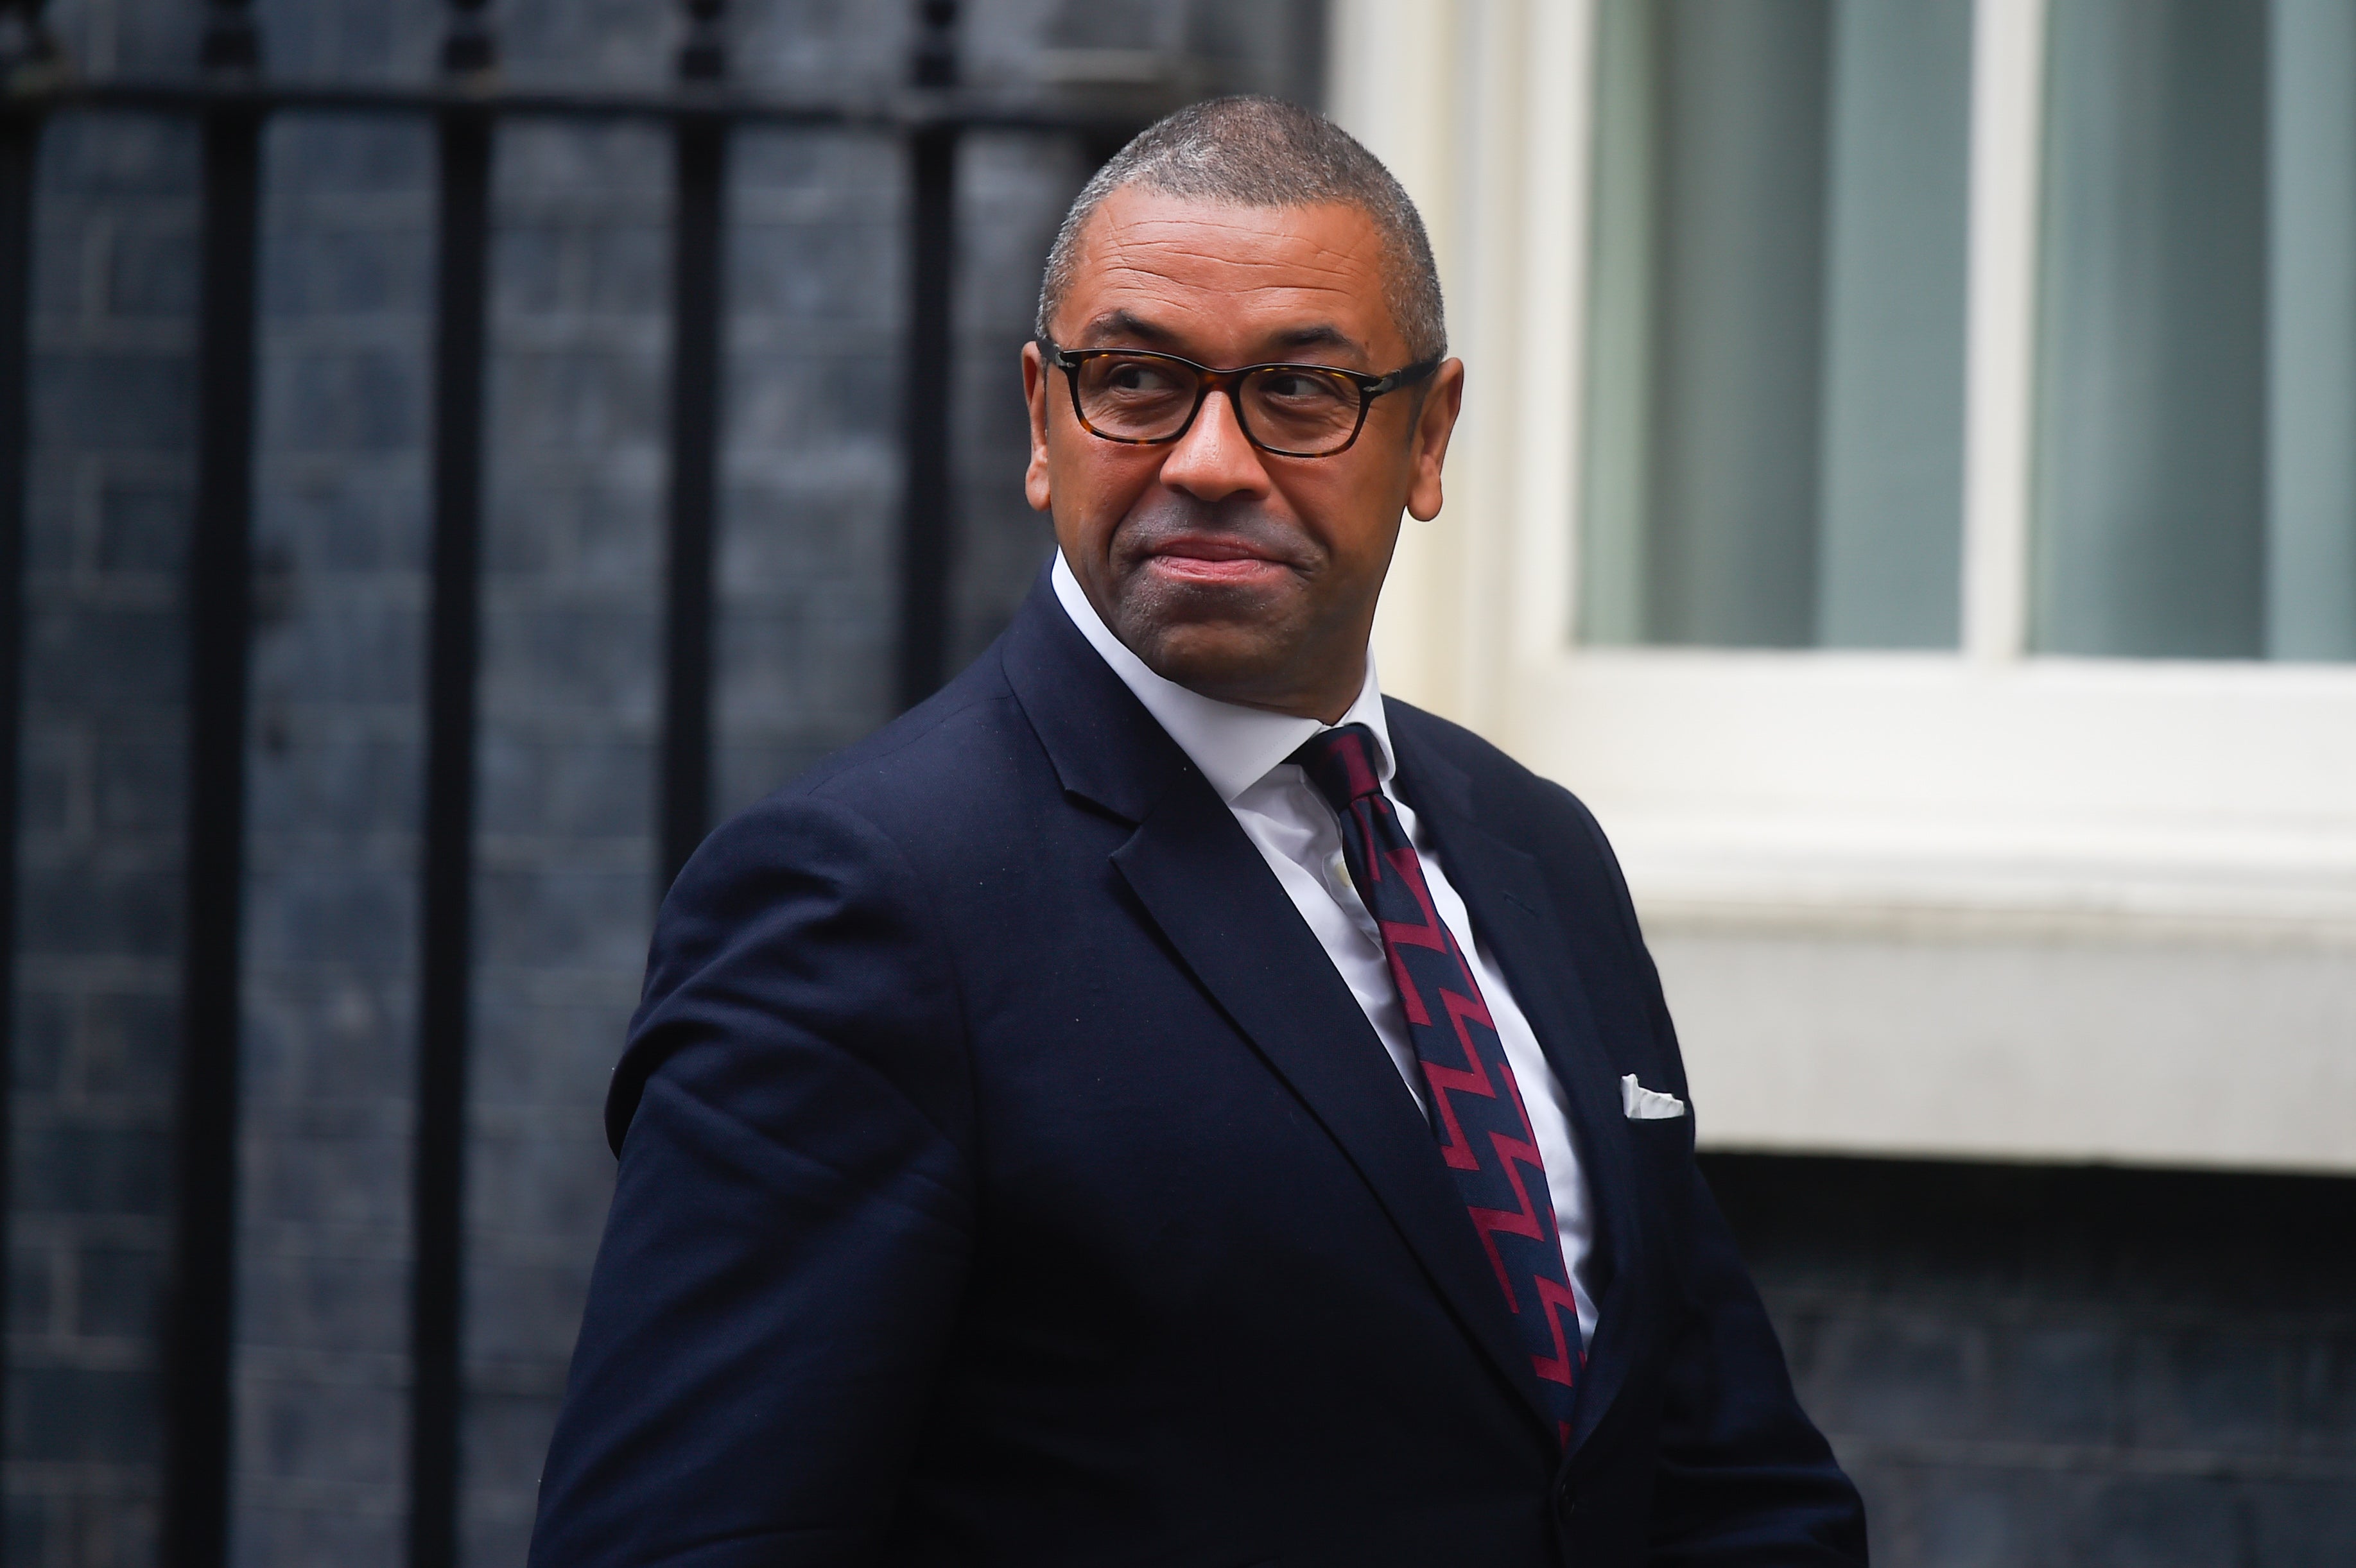 James Cleverly replaced Suella Braverman as Home Secretary after she was unceremoniously sacked from the cabinet